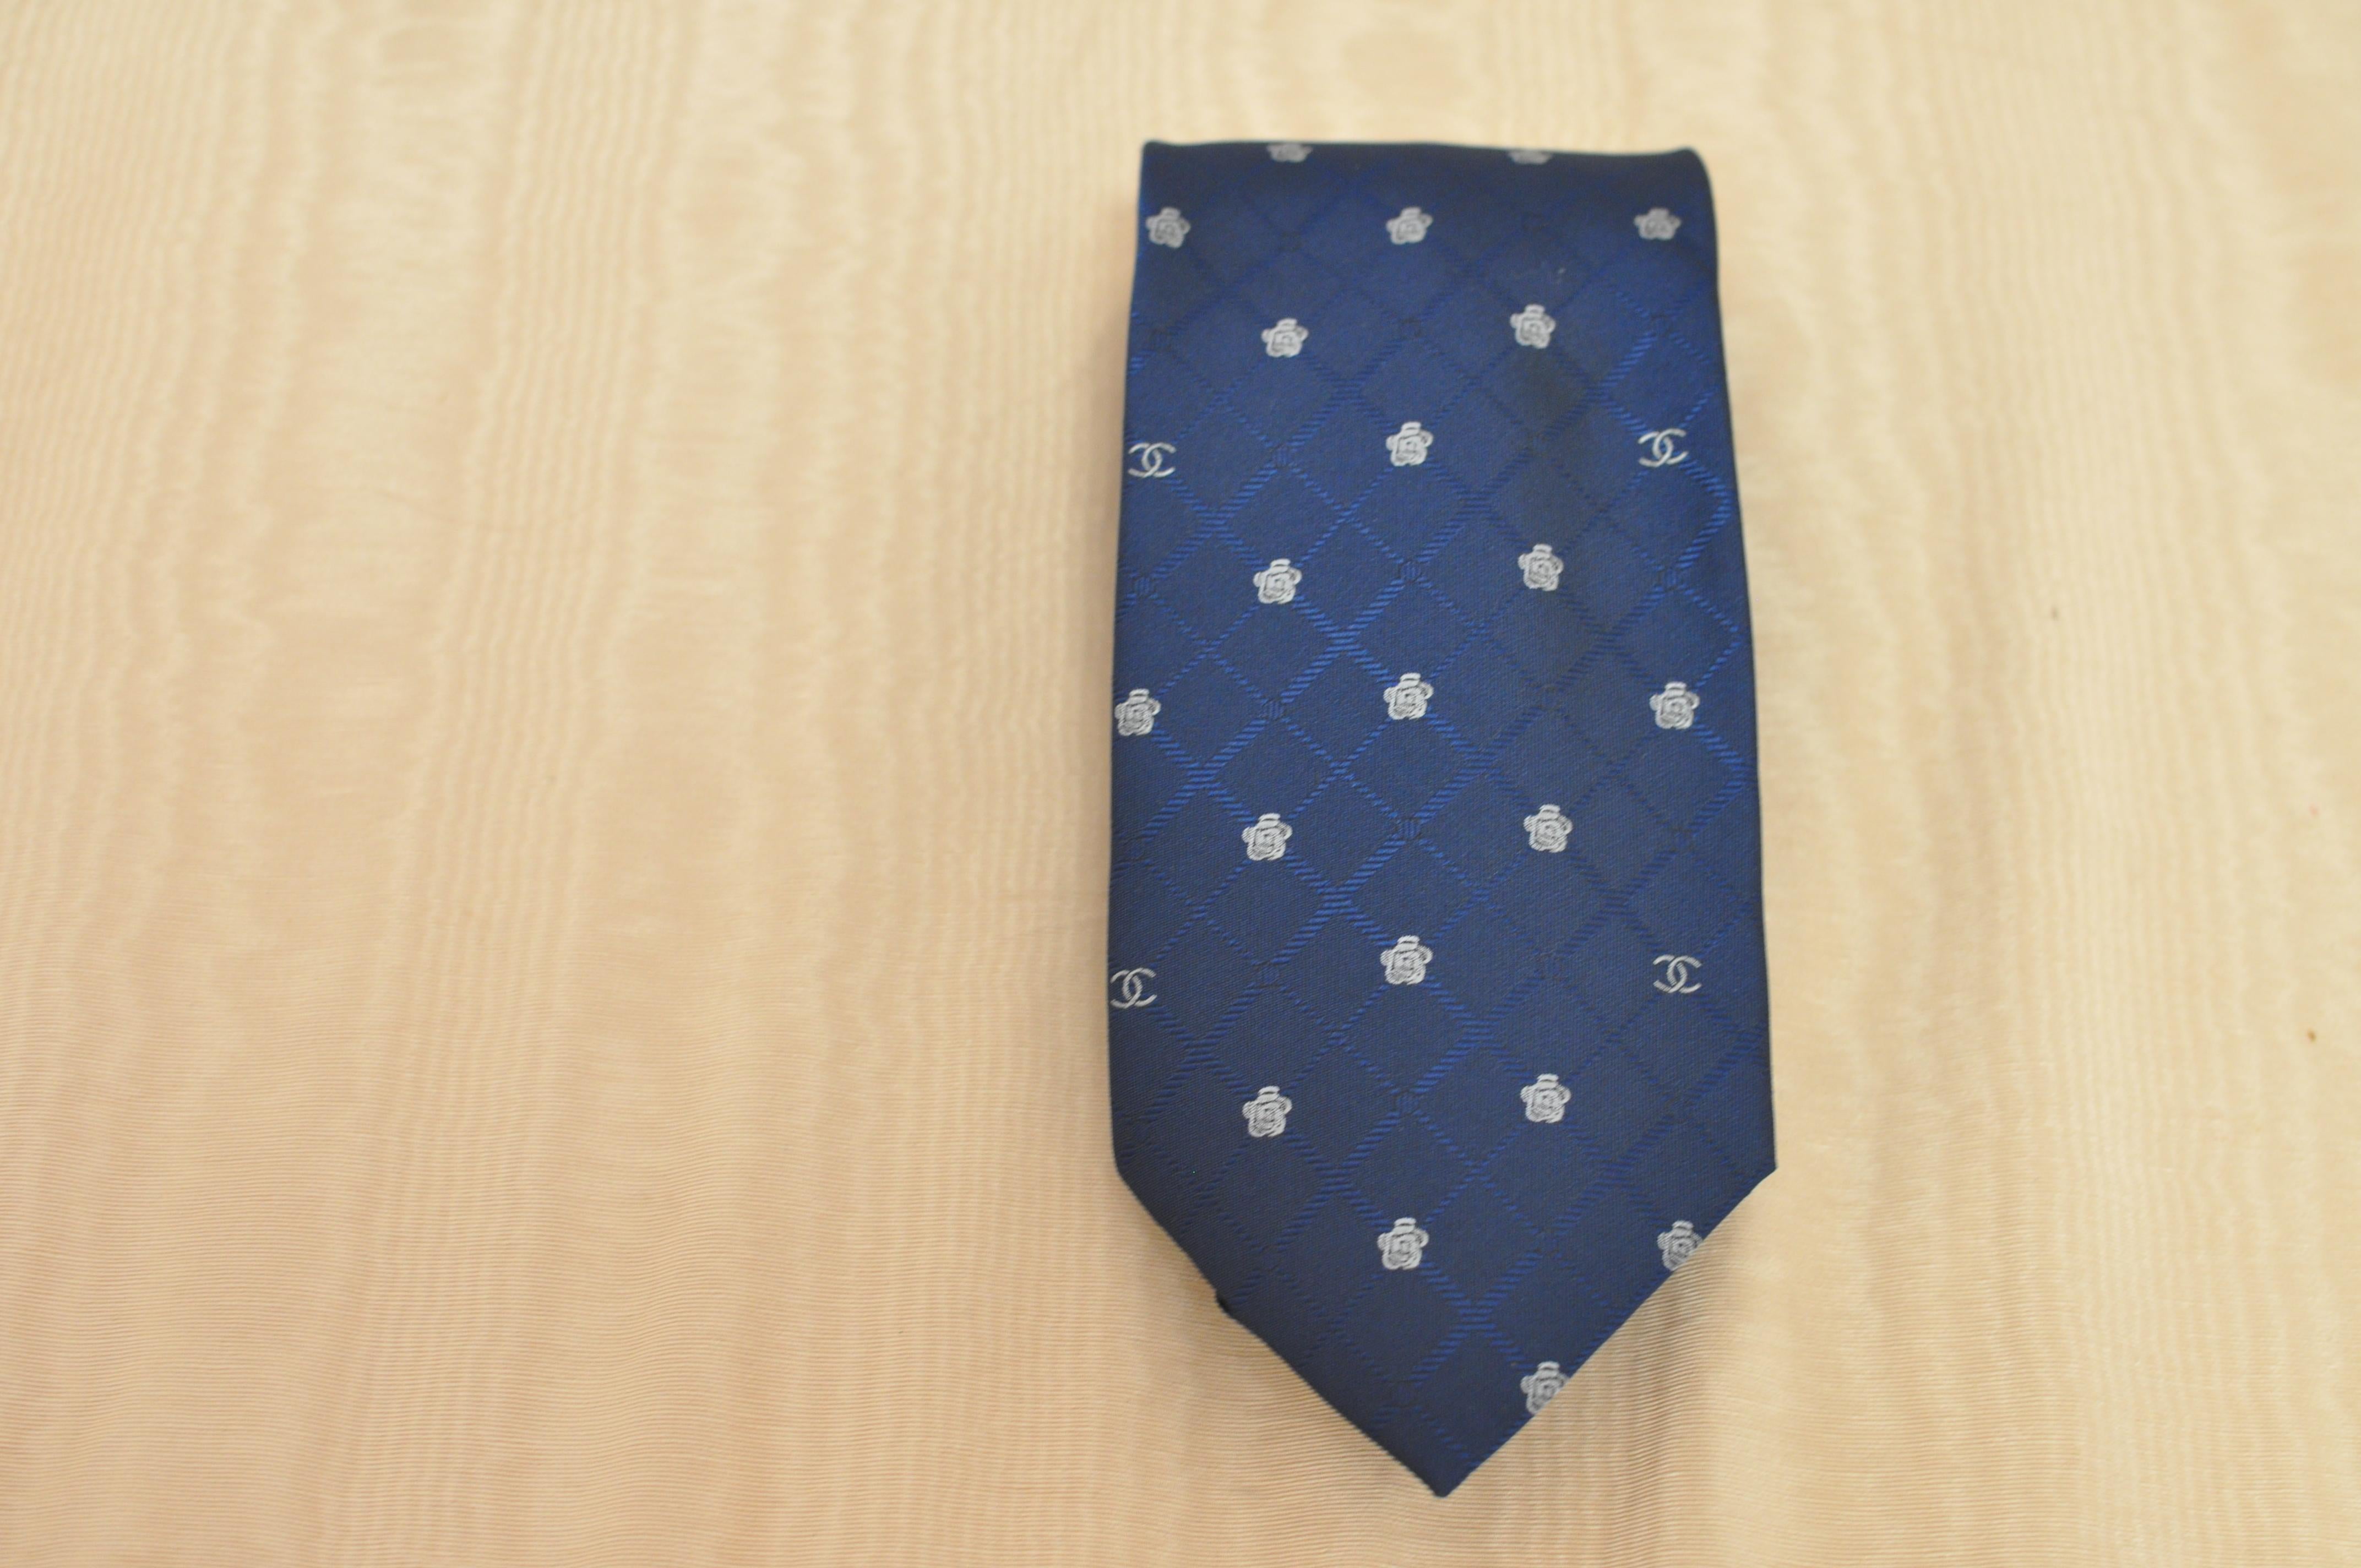 Dark blue criss cross pattern background with a contrasting cc and camellia flower print. Made in Italy.